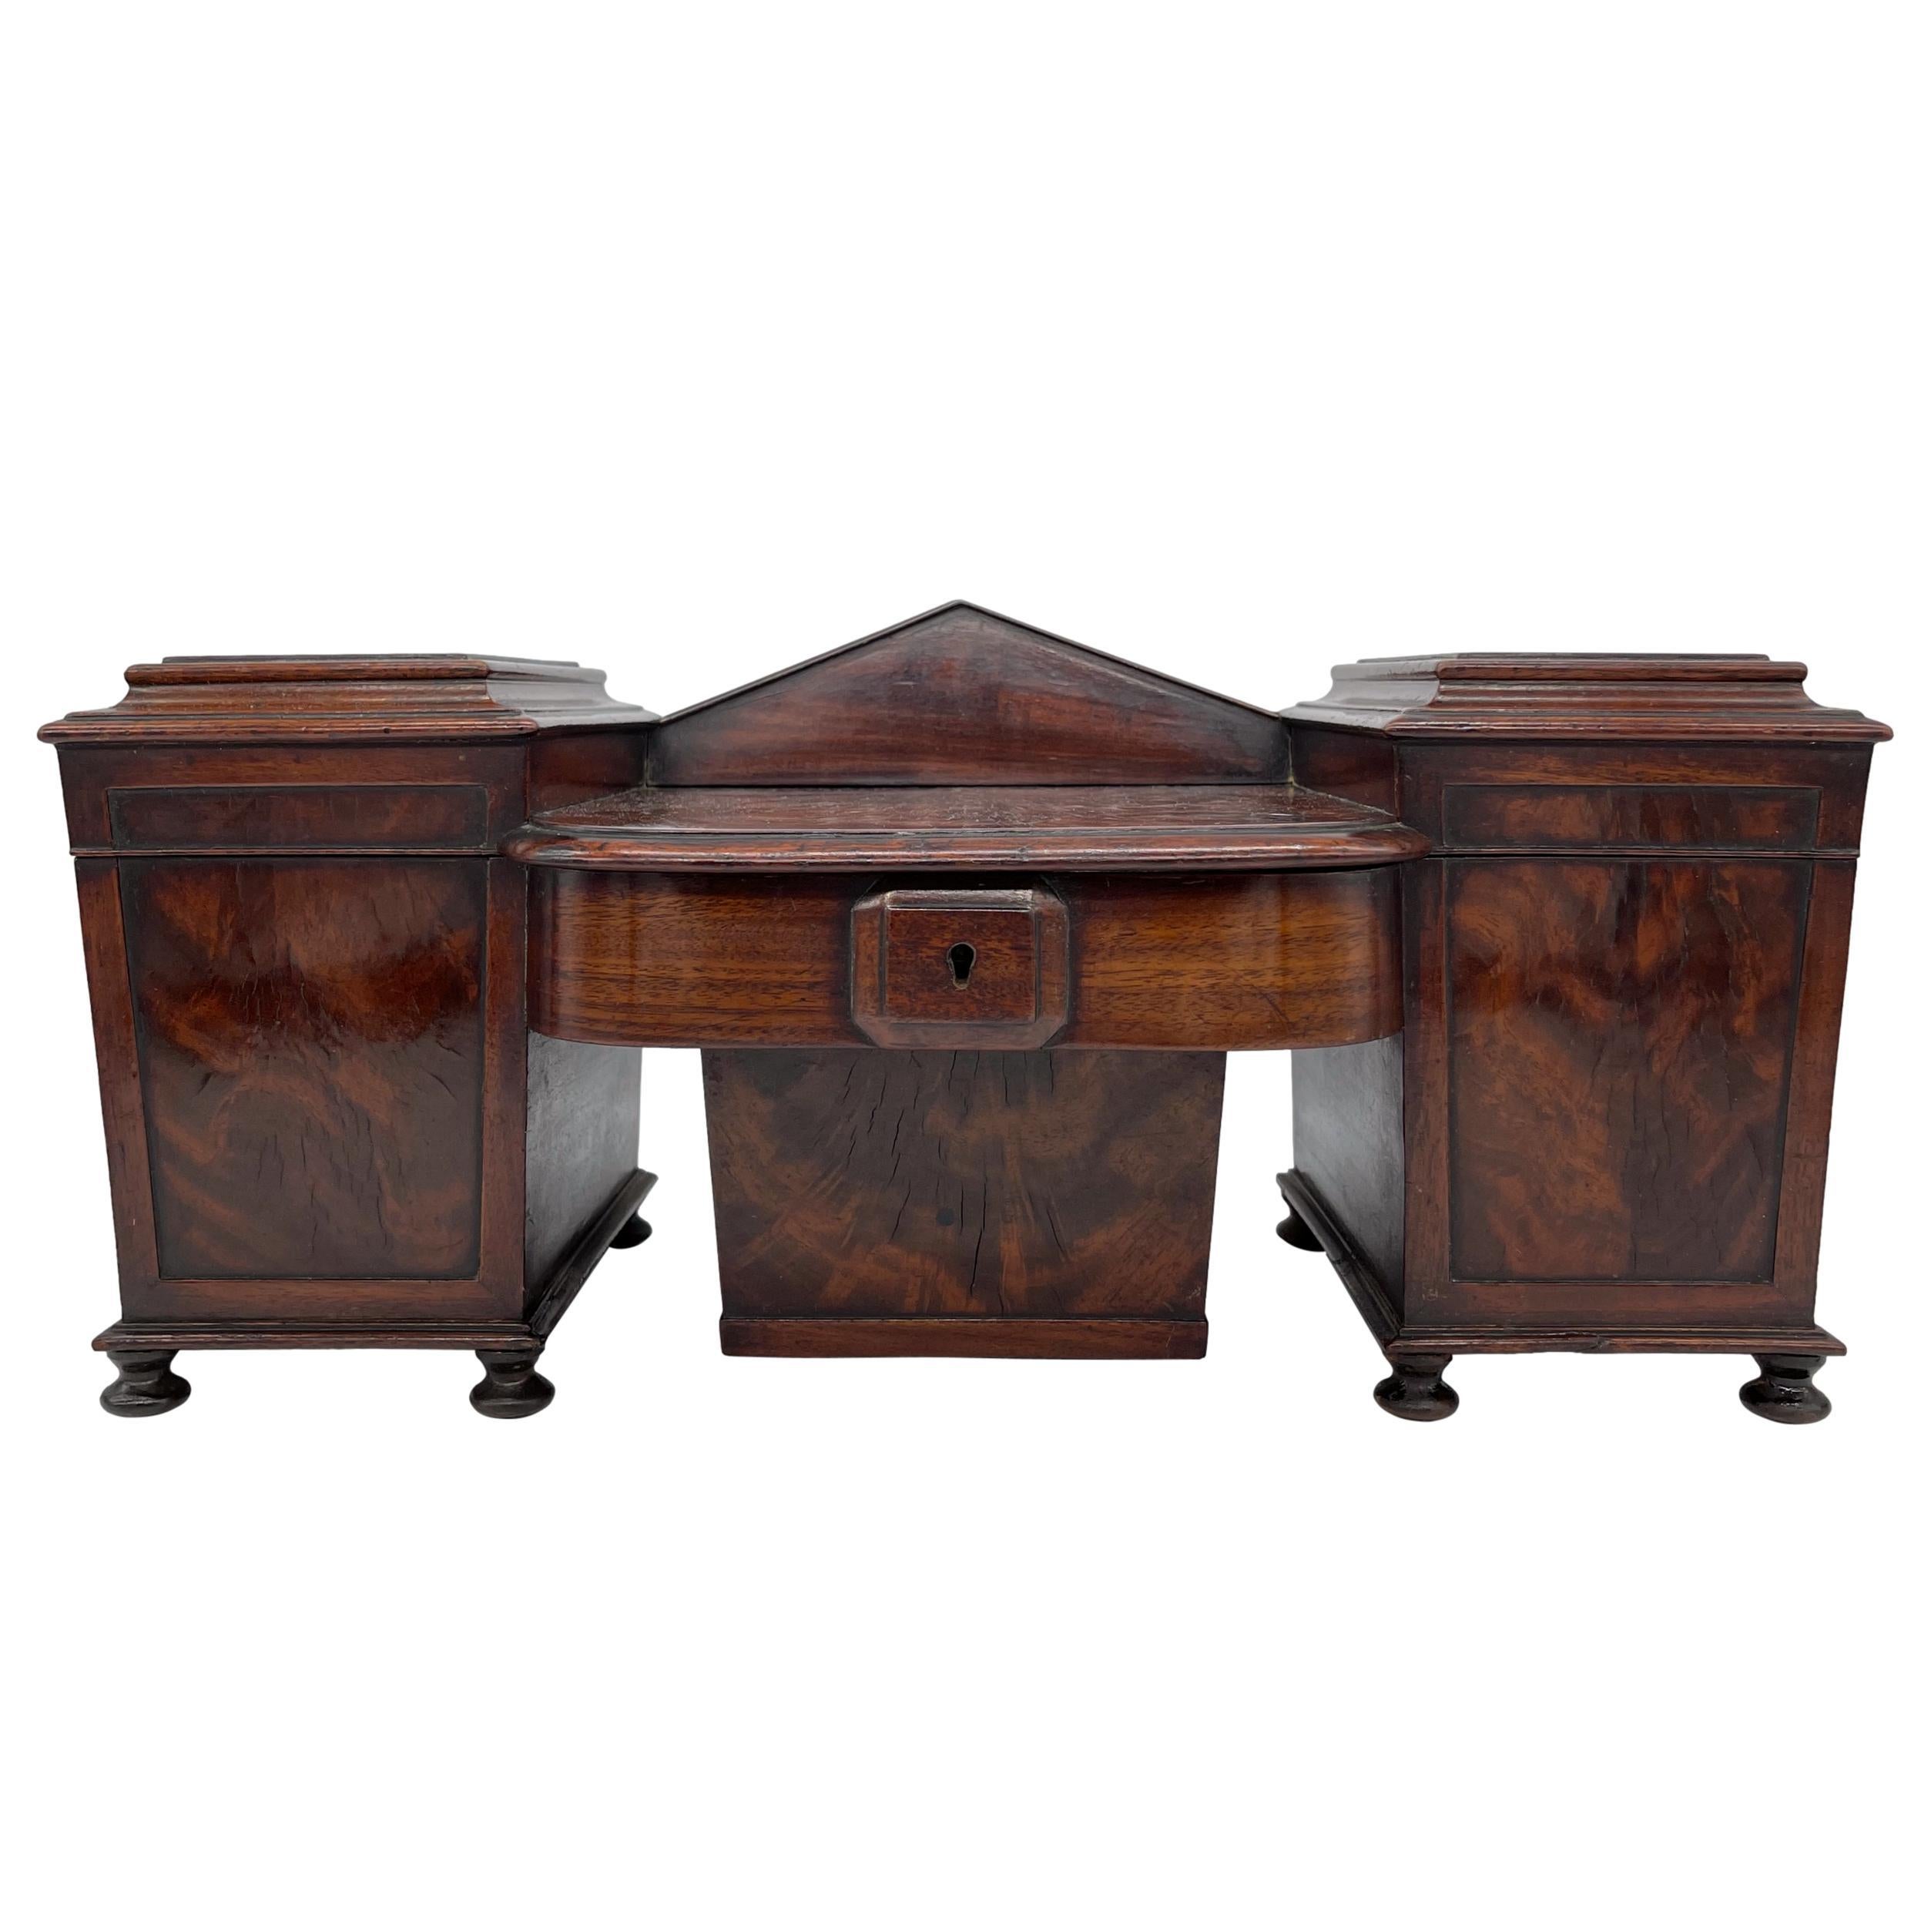 A rare William IV tea caddy in the form of a perfectly scaled model-miniature double pedestal sideboard with Integral Wine Cellaret, the pedestals with molded caddy tops above raised panel doors, the centerboard with a stepped bow front, above a